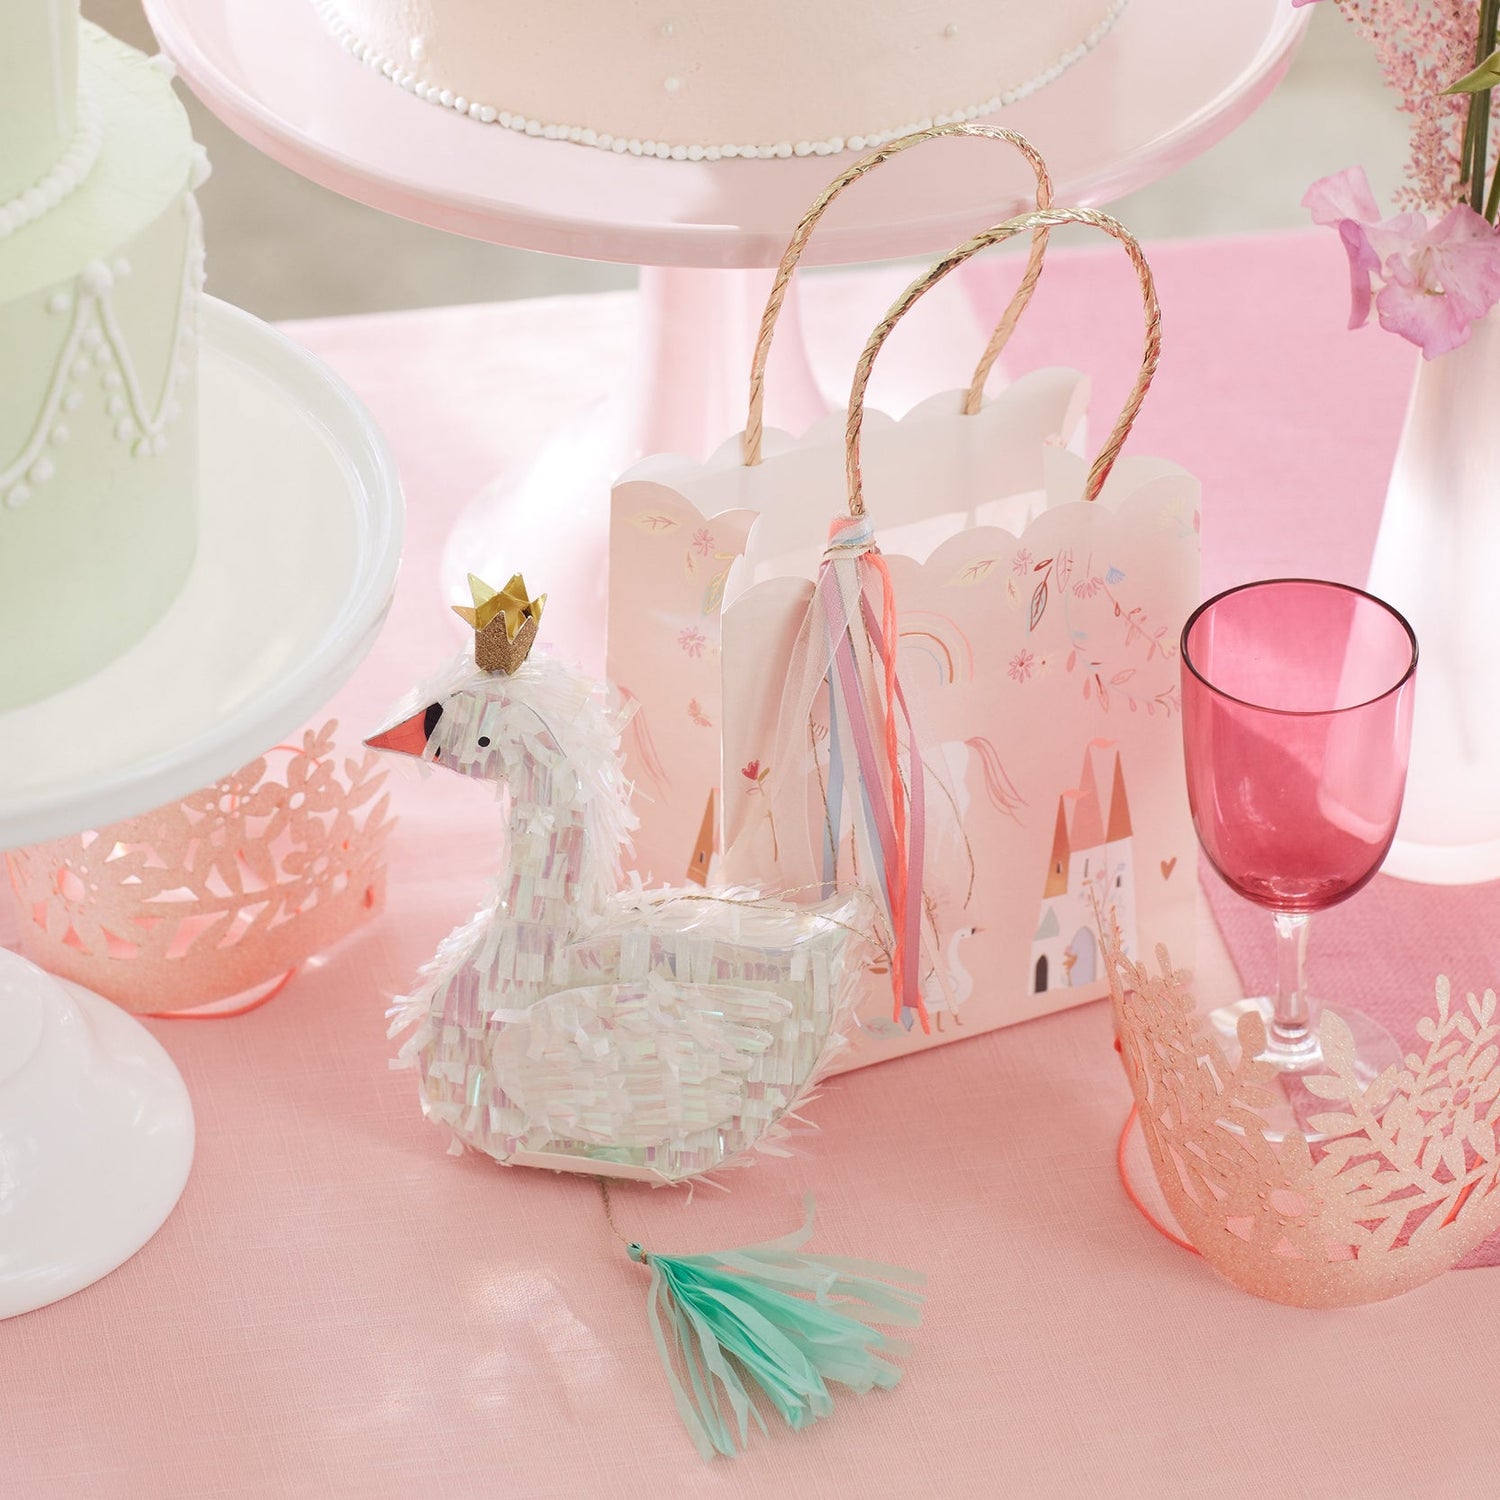 Princess table with party bag